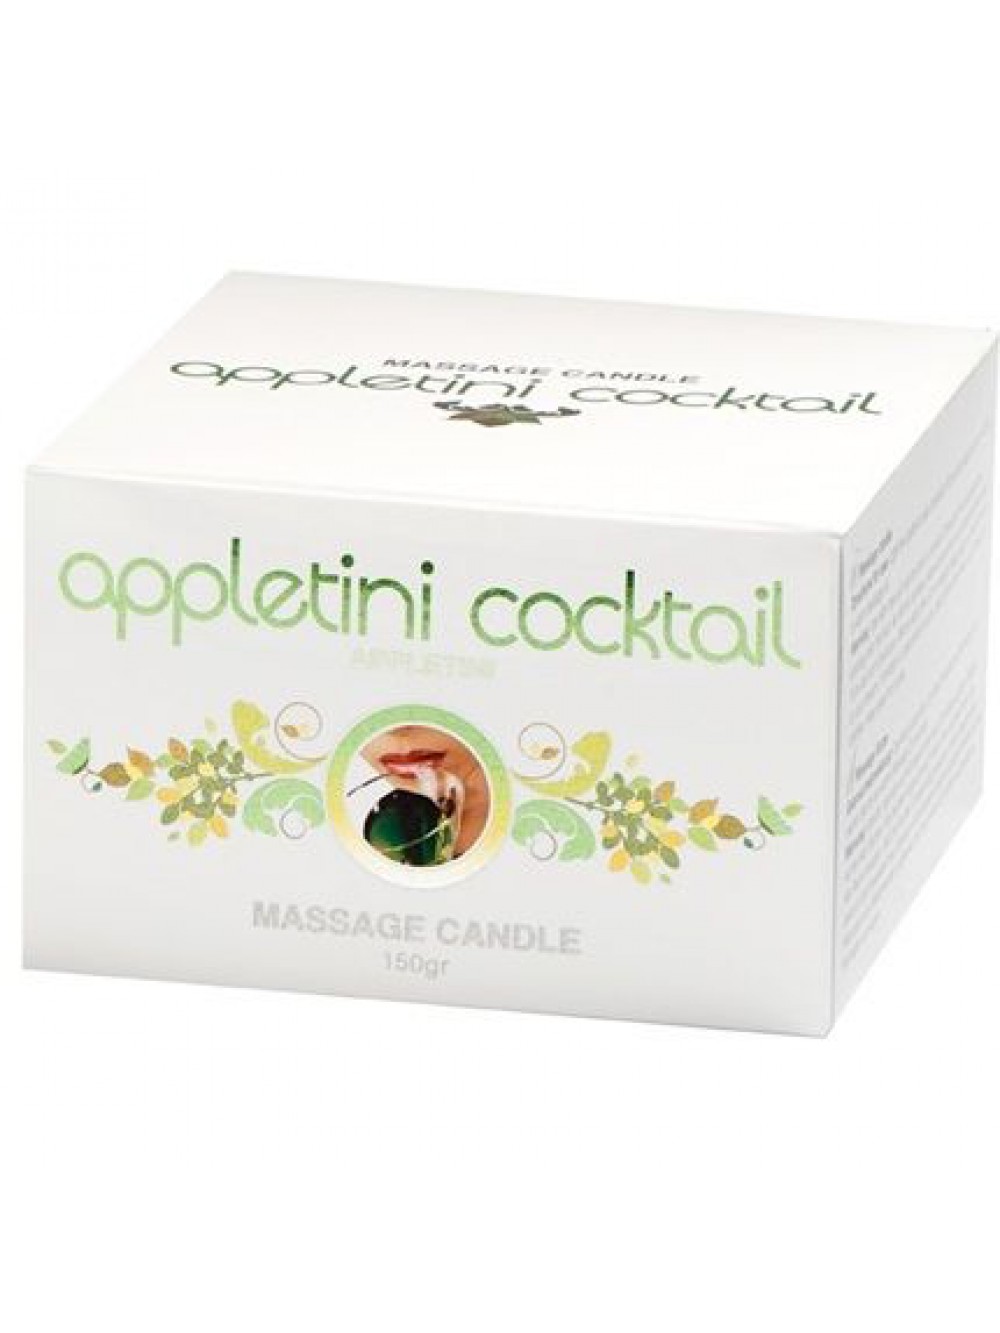 COBECO CANDLE APPLETINI COCKTAIL 150GR